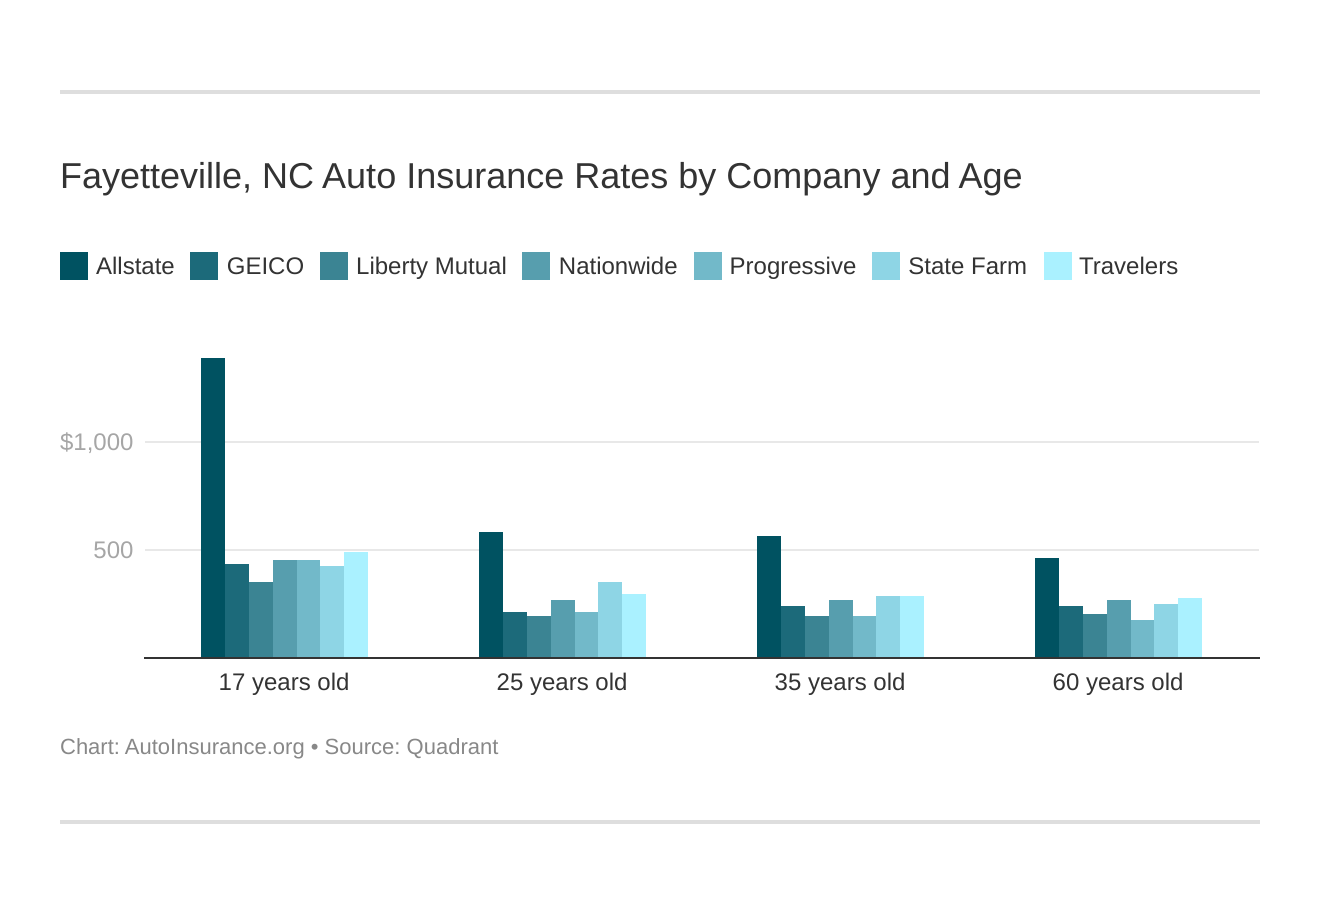 Fayetteville, NC Auto Insurance Rates by Company and Age